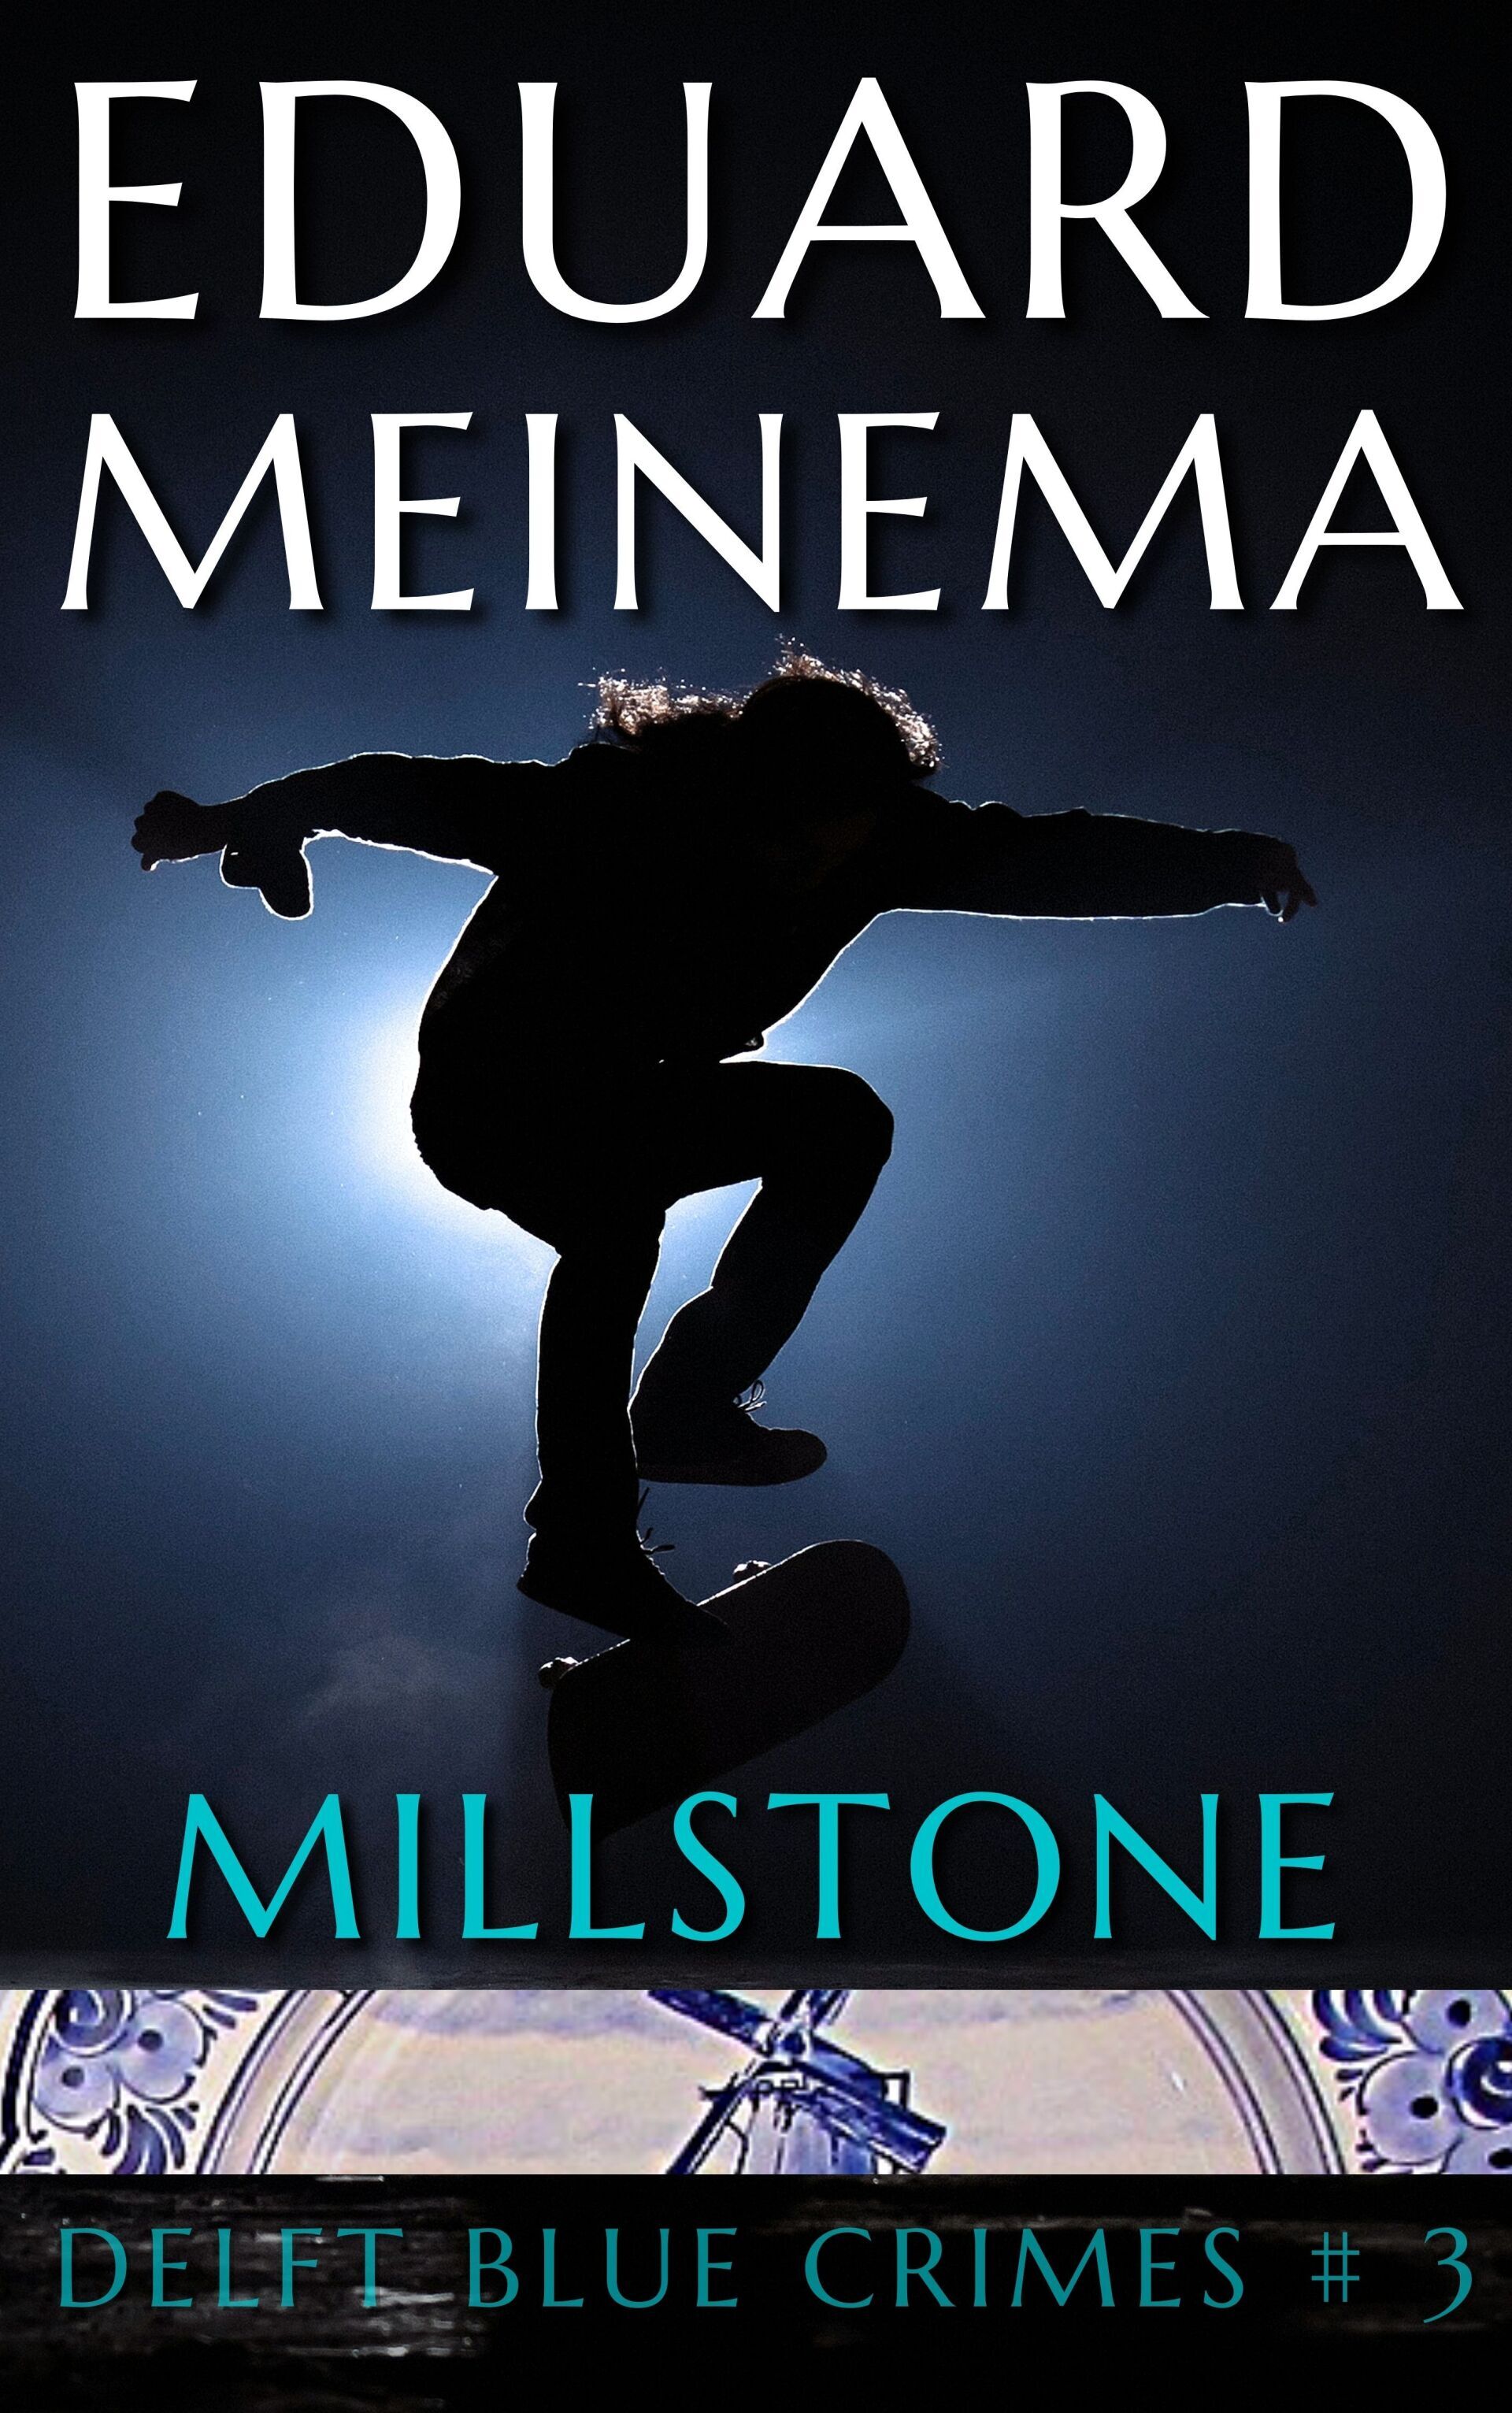 Delft Blue Crimes #3 Millstone by Eduard Meinema. Buy ebook now, directly from the author.